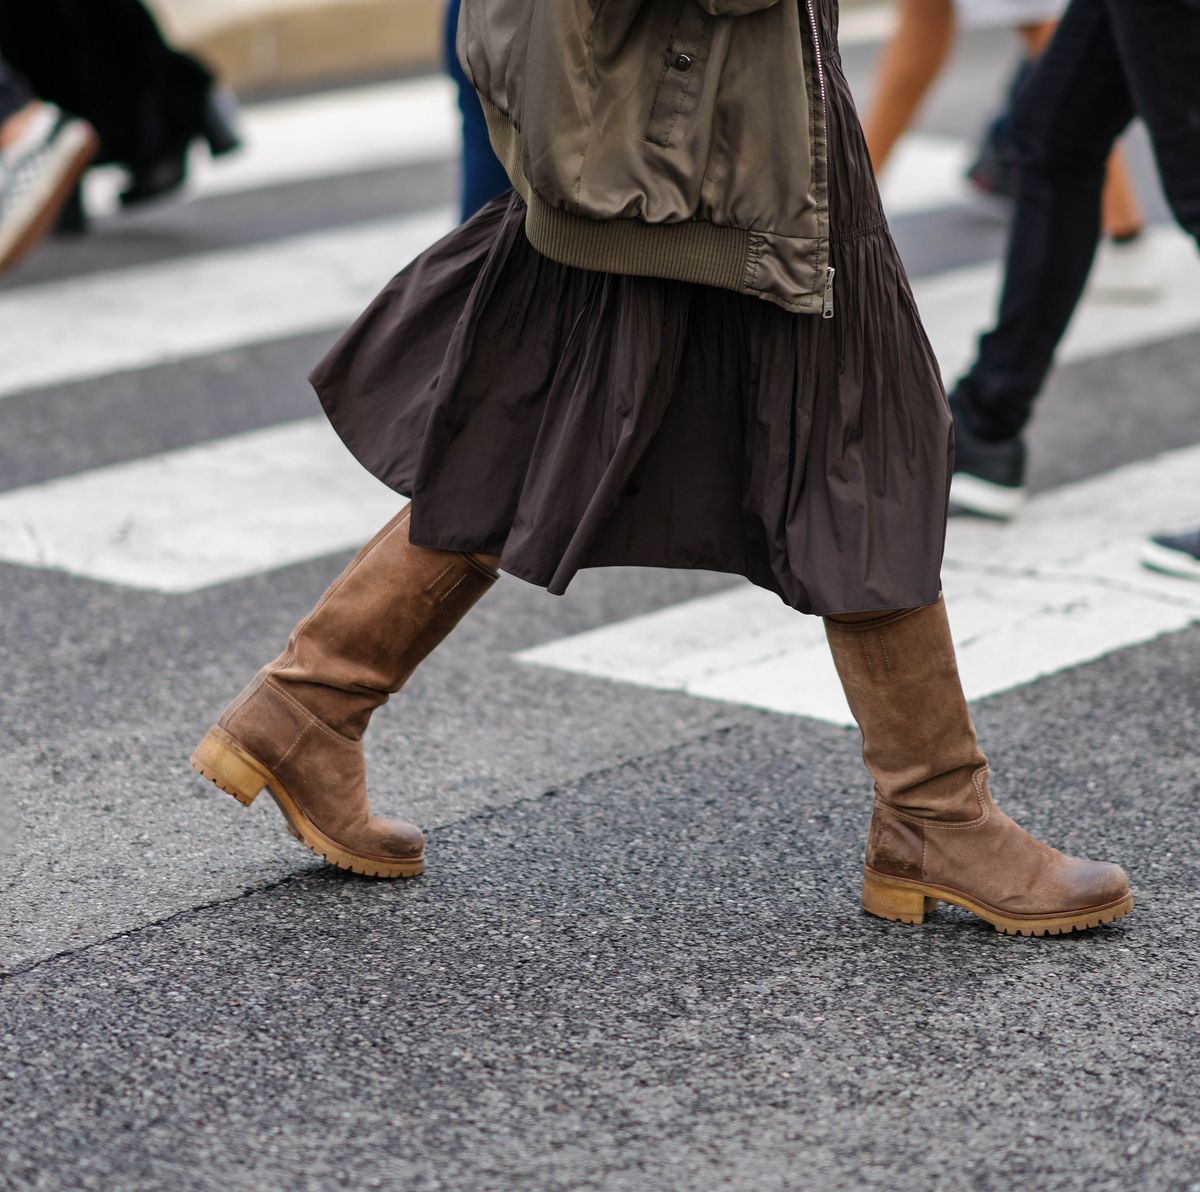 Summer's Most Surprising Street-Style Trend? Knee-High Boots